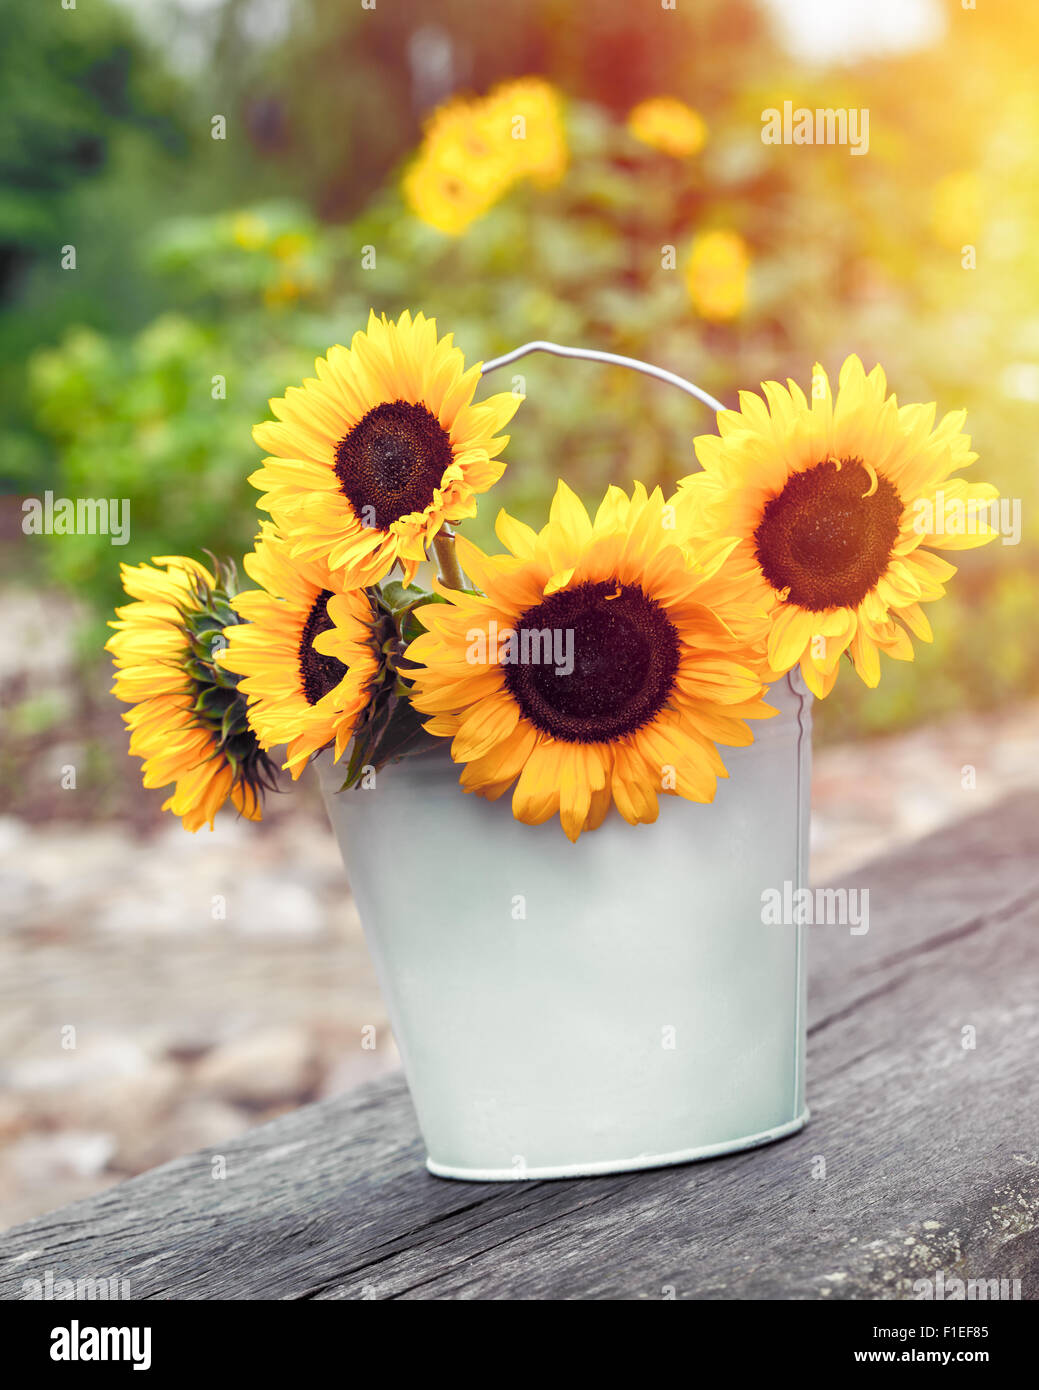 Sunflowers in bucket outdoors. Wedding decorations in rustic style. Stock Photo